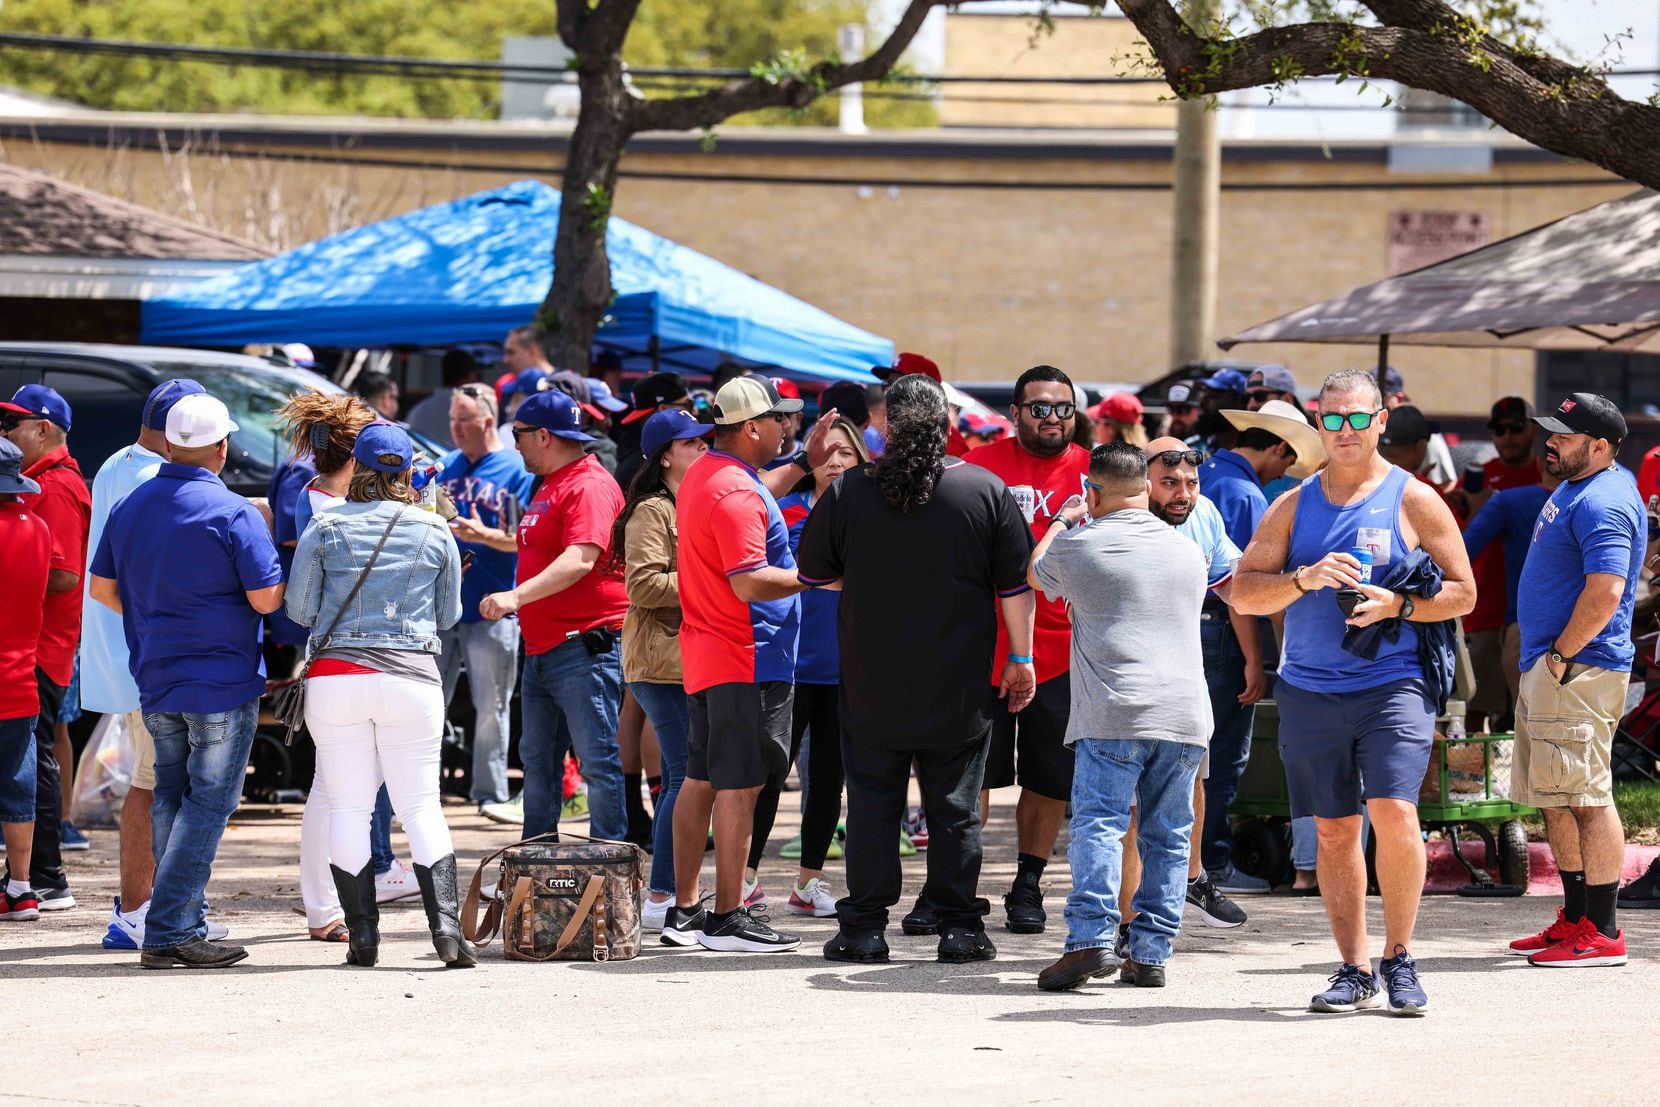 Fans gather outside the Globe Life Field before the game between Texas Rangers and Toronto Blue Jays on opening day in Arlington, Texas on Monday, April 5, 2021. (Lola Gomez/The Dallas Morning News)